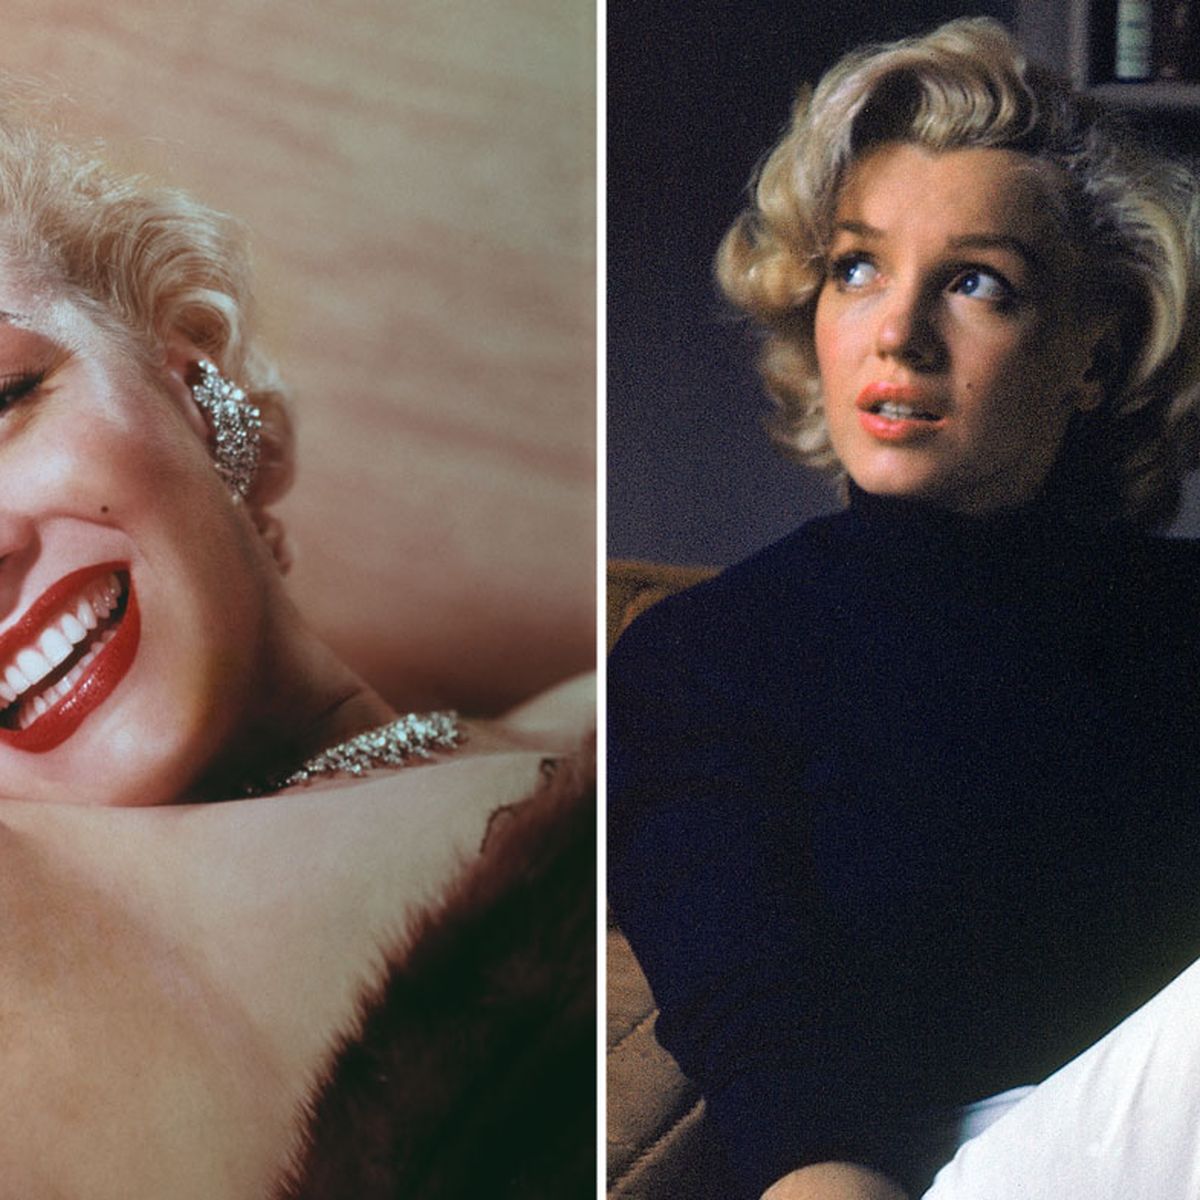 The Birth Of The Iconic Actress Marilyn Monroe In History Today June 1, 1926